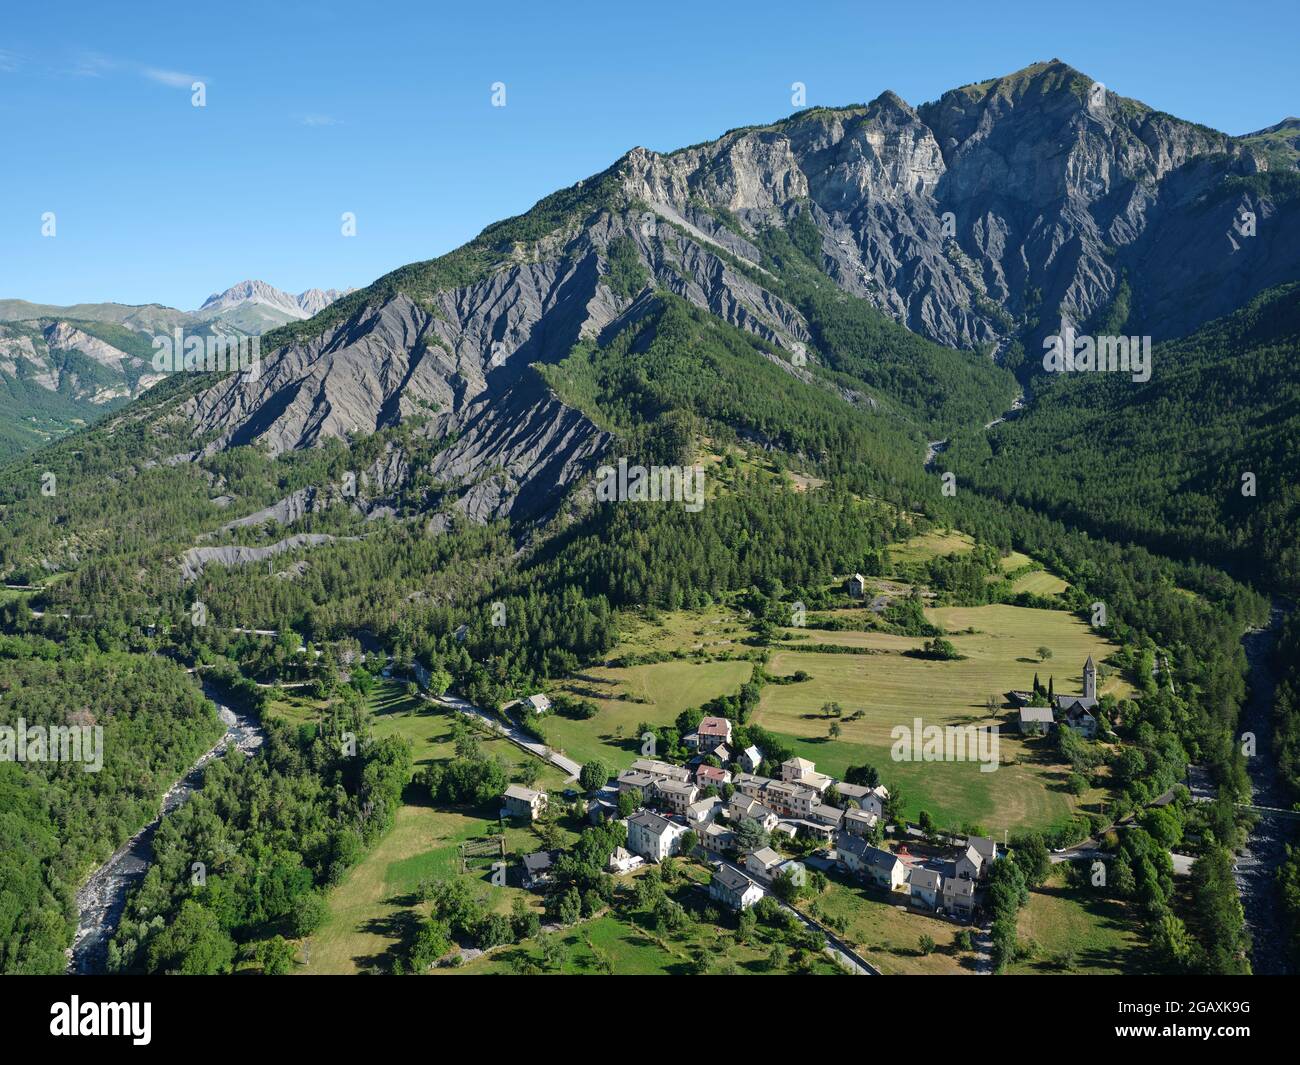 AERIAL VIEW. Village of Villeneuve d'Entraunes at the foothill of a rocky mountain in the Upper Var Valley. Alpes-Maritimes, France. Stock Photo